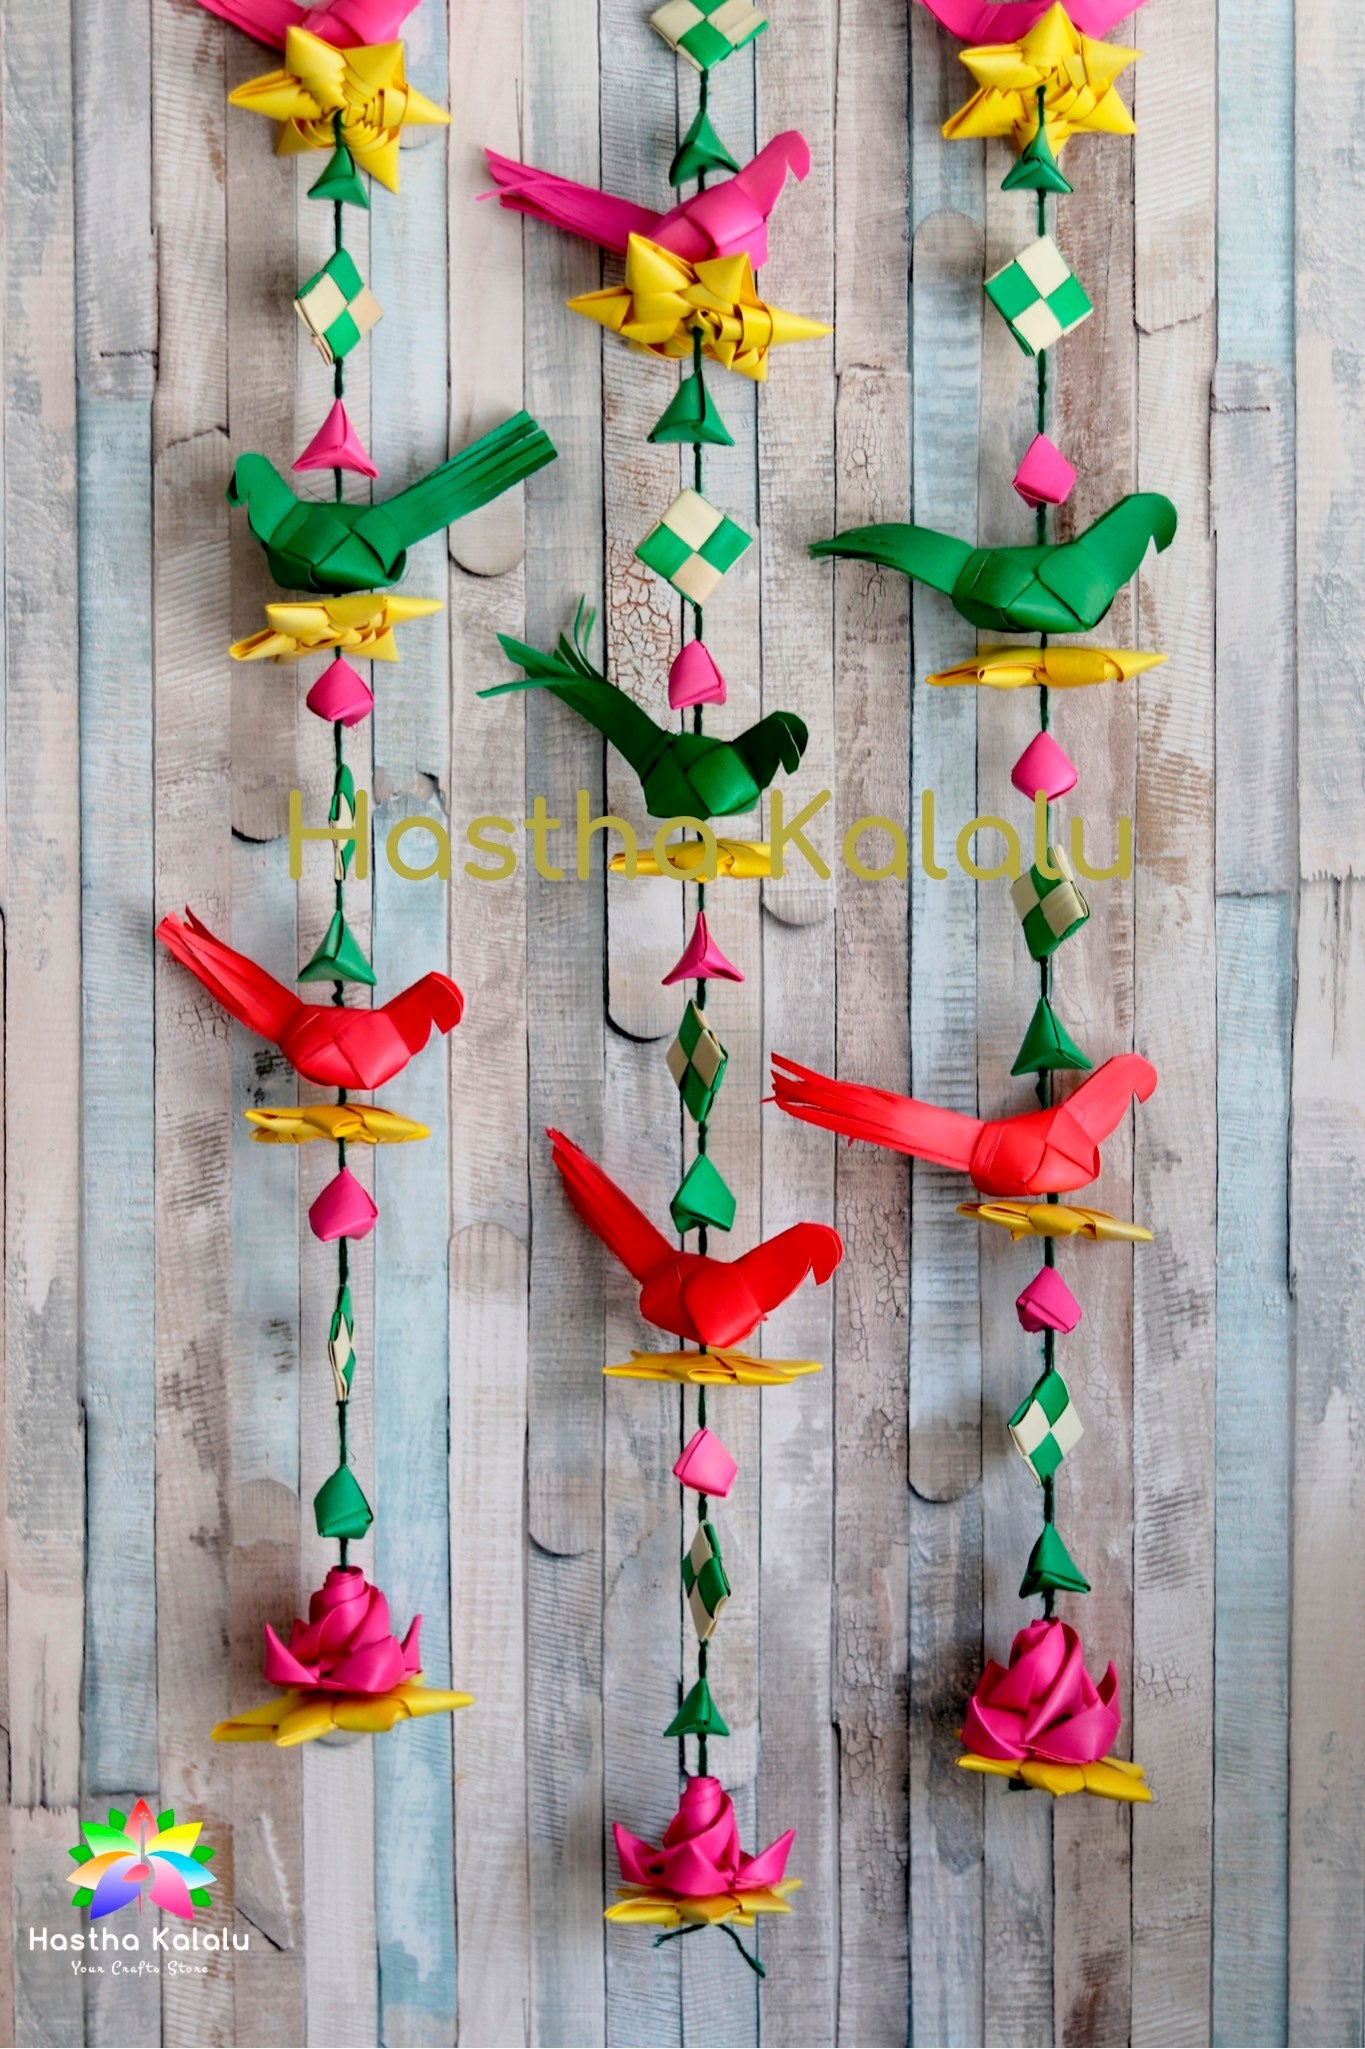 Palm leaf parrot hangings/decor material